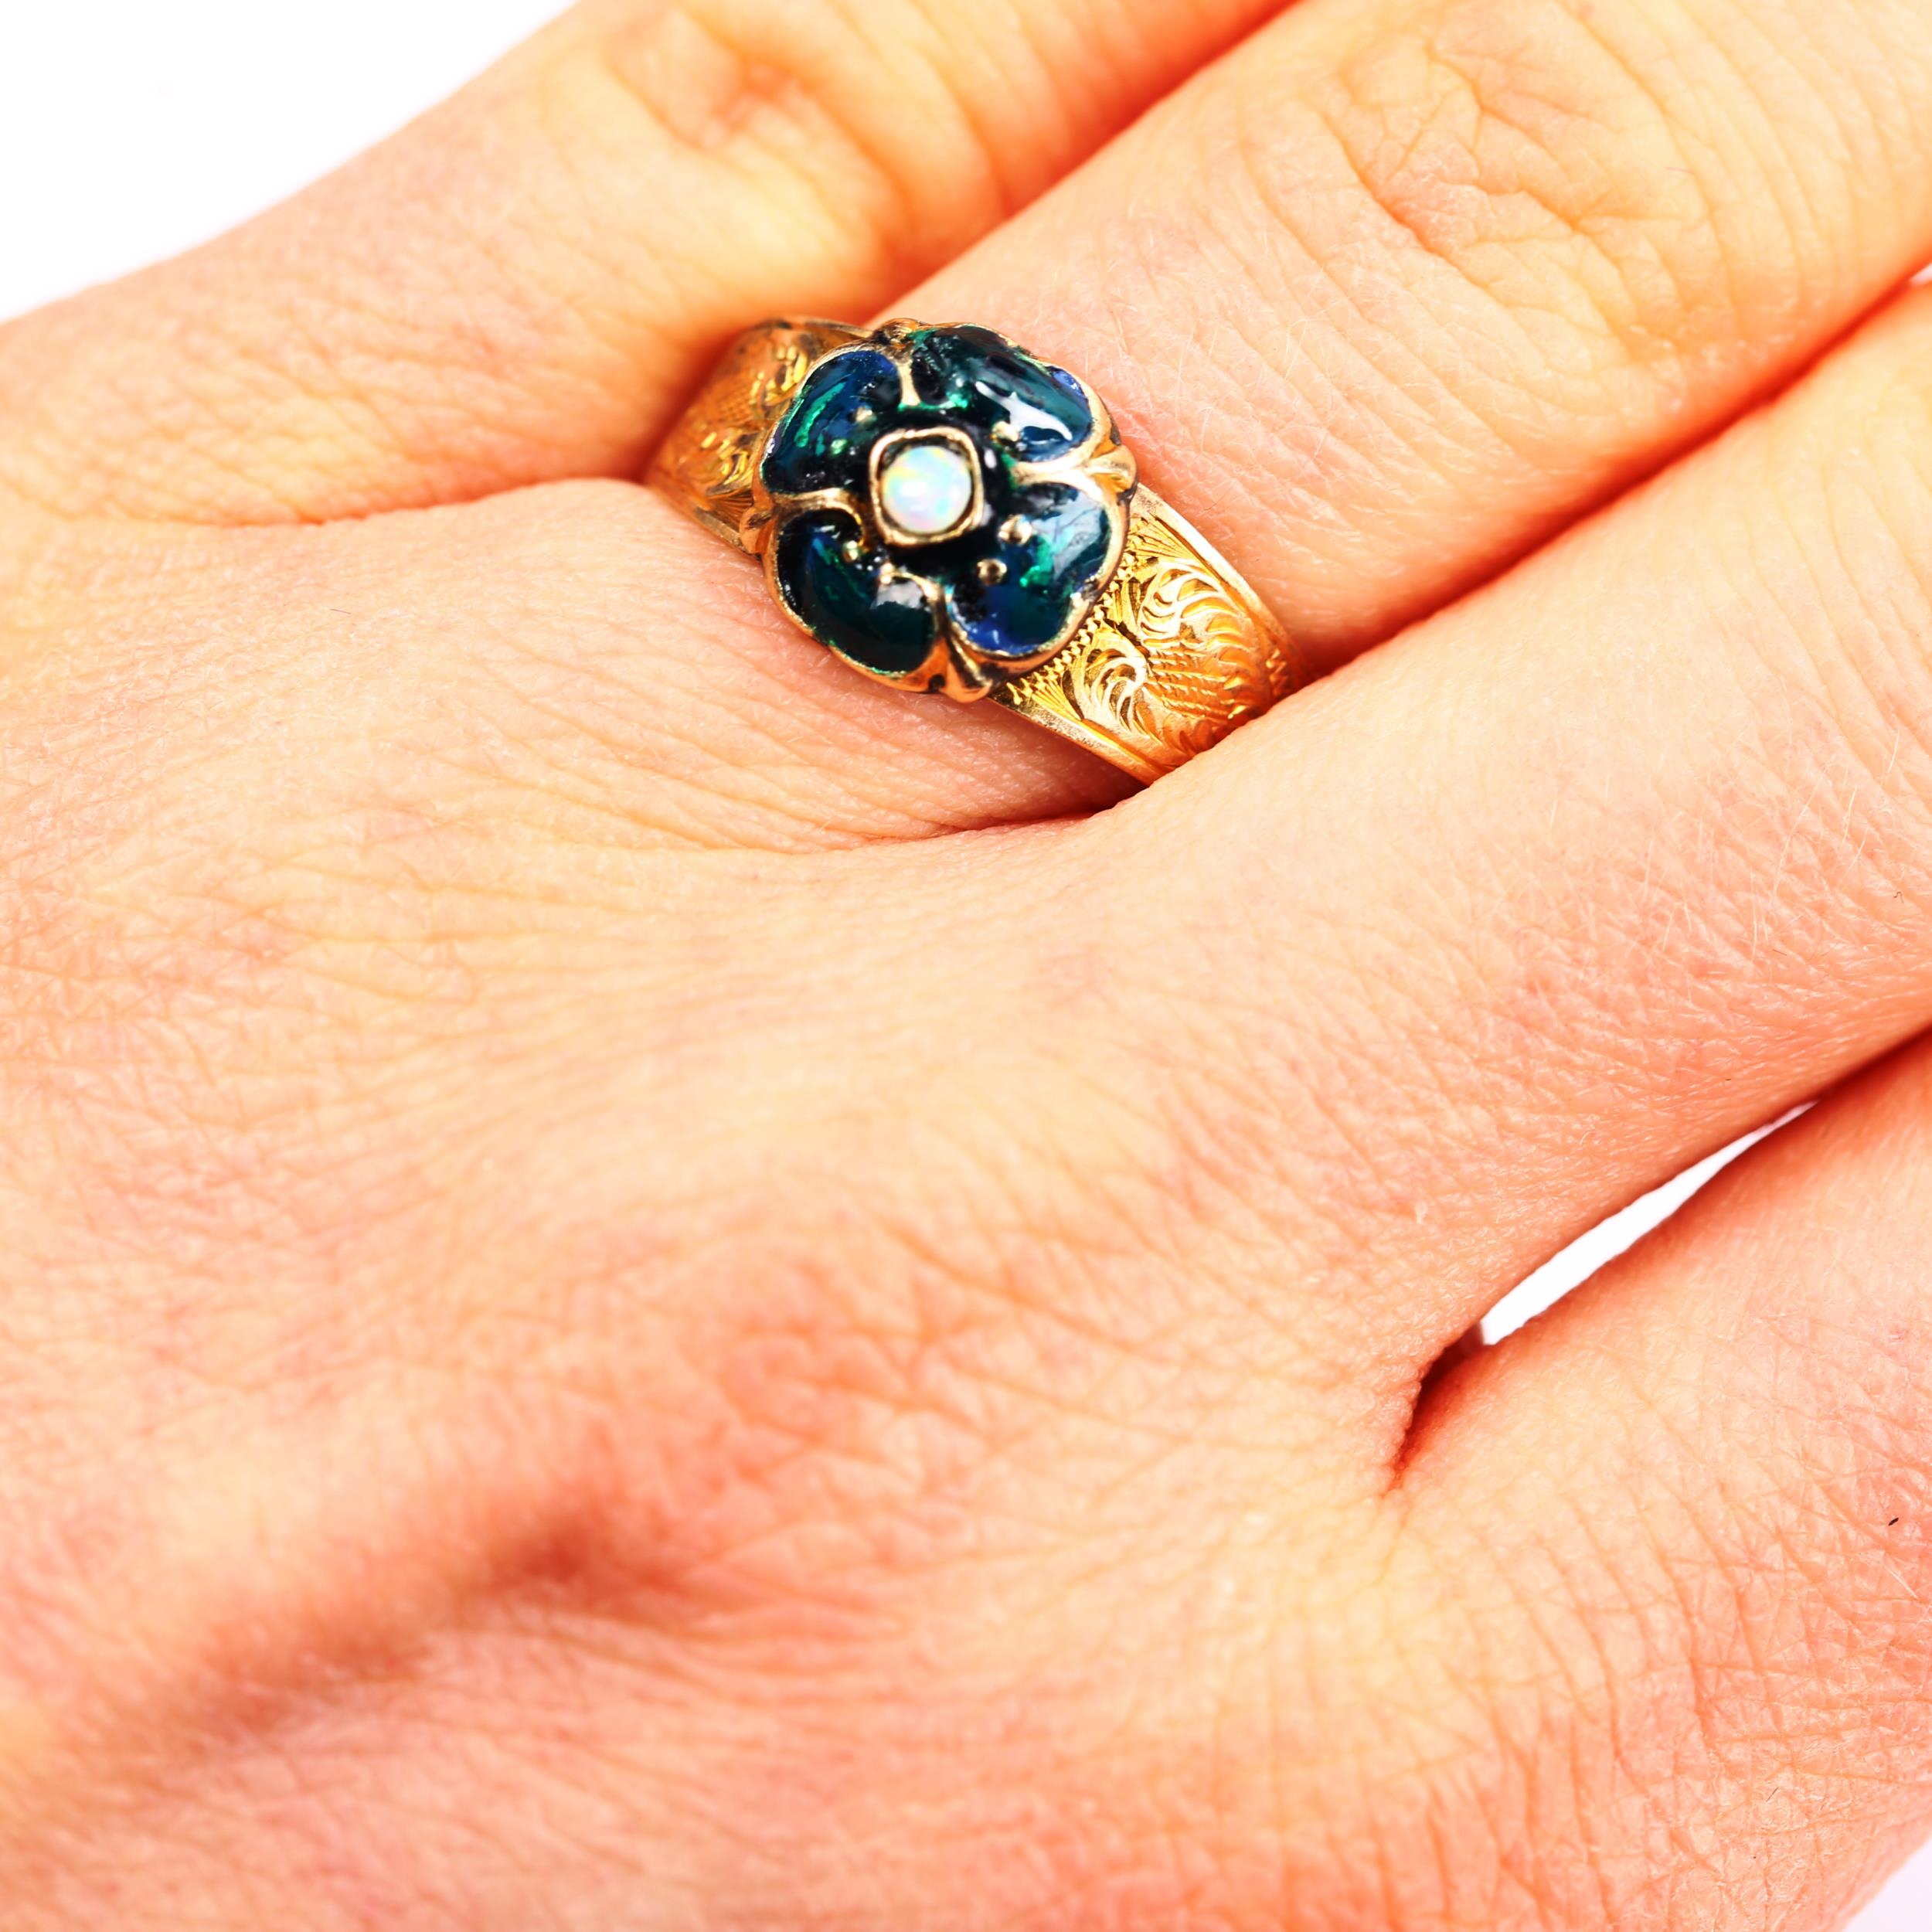 An Antique opal and enamel clover ring, unmarked gold settings with floral engraved shoulders, - Image 4 of 4